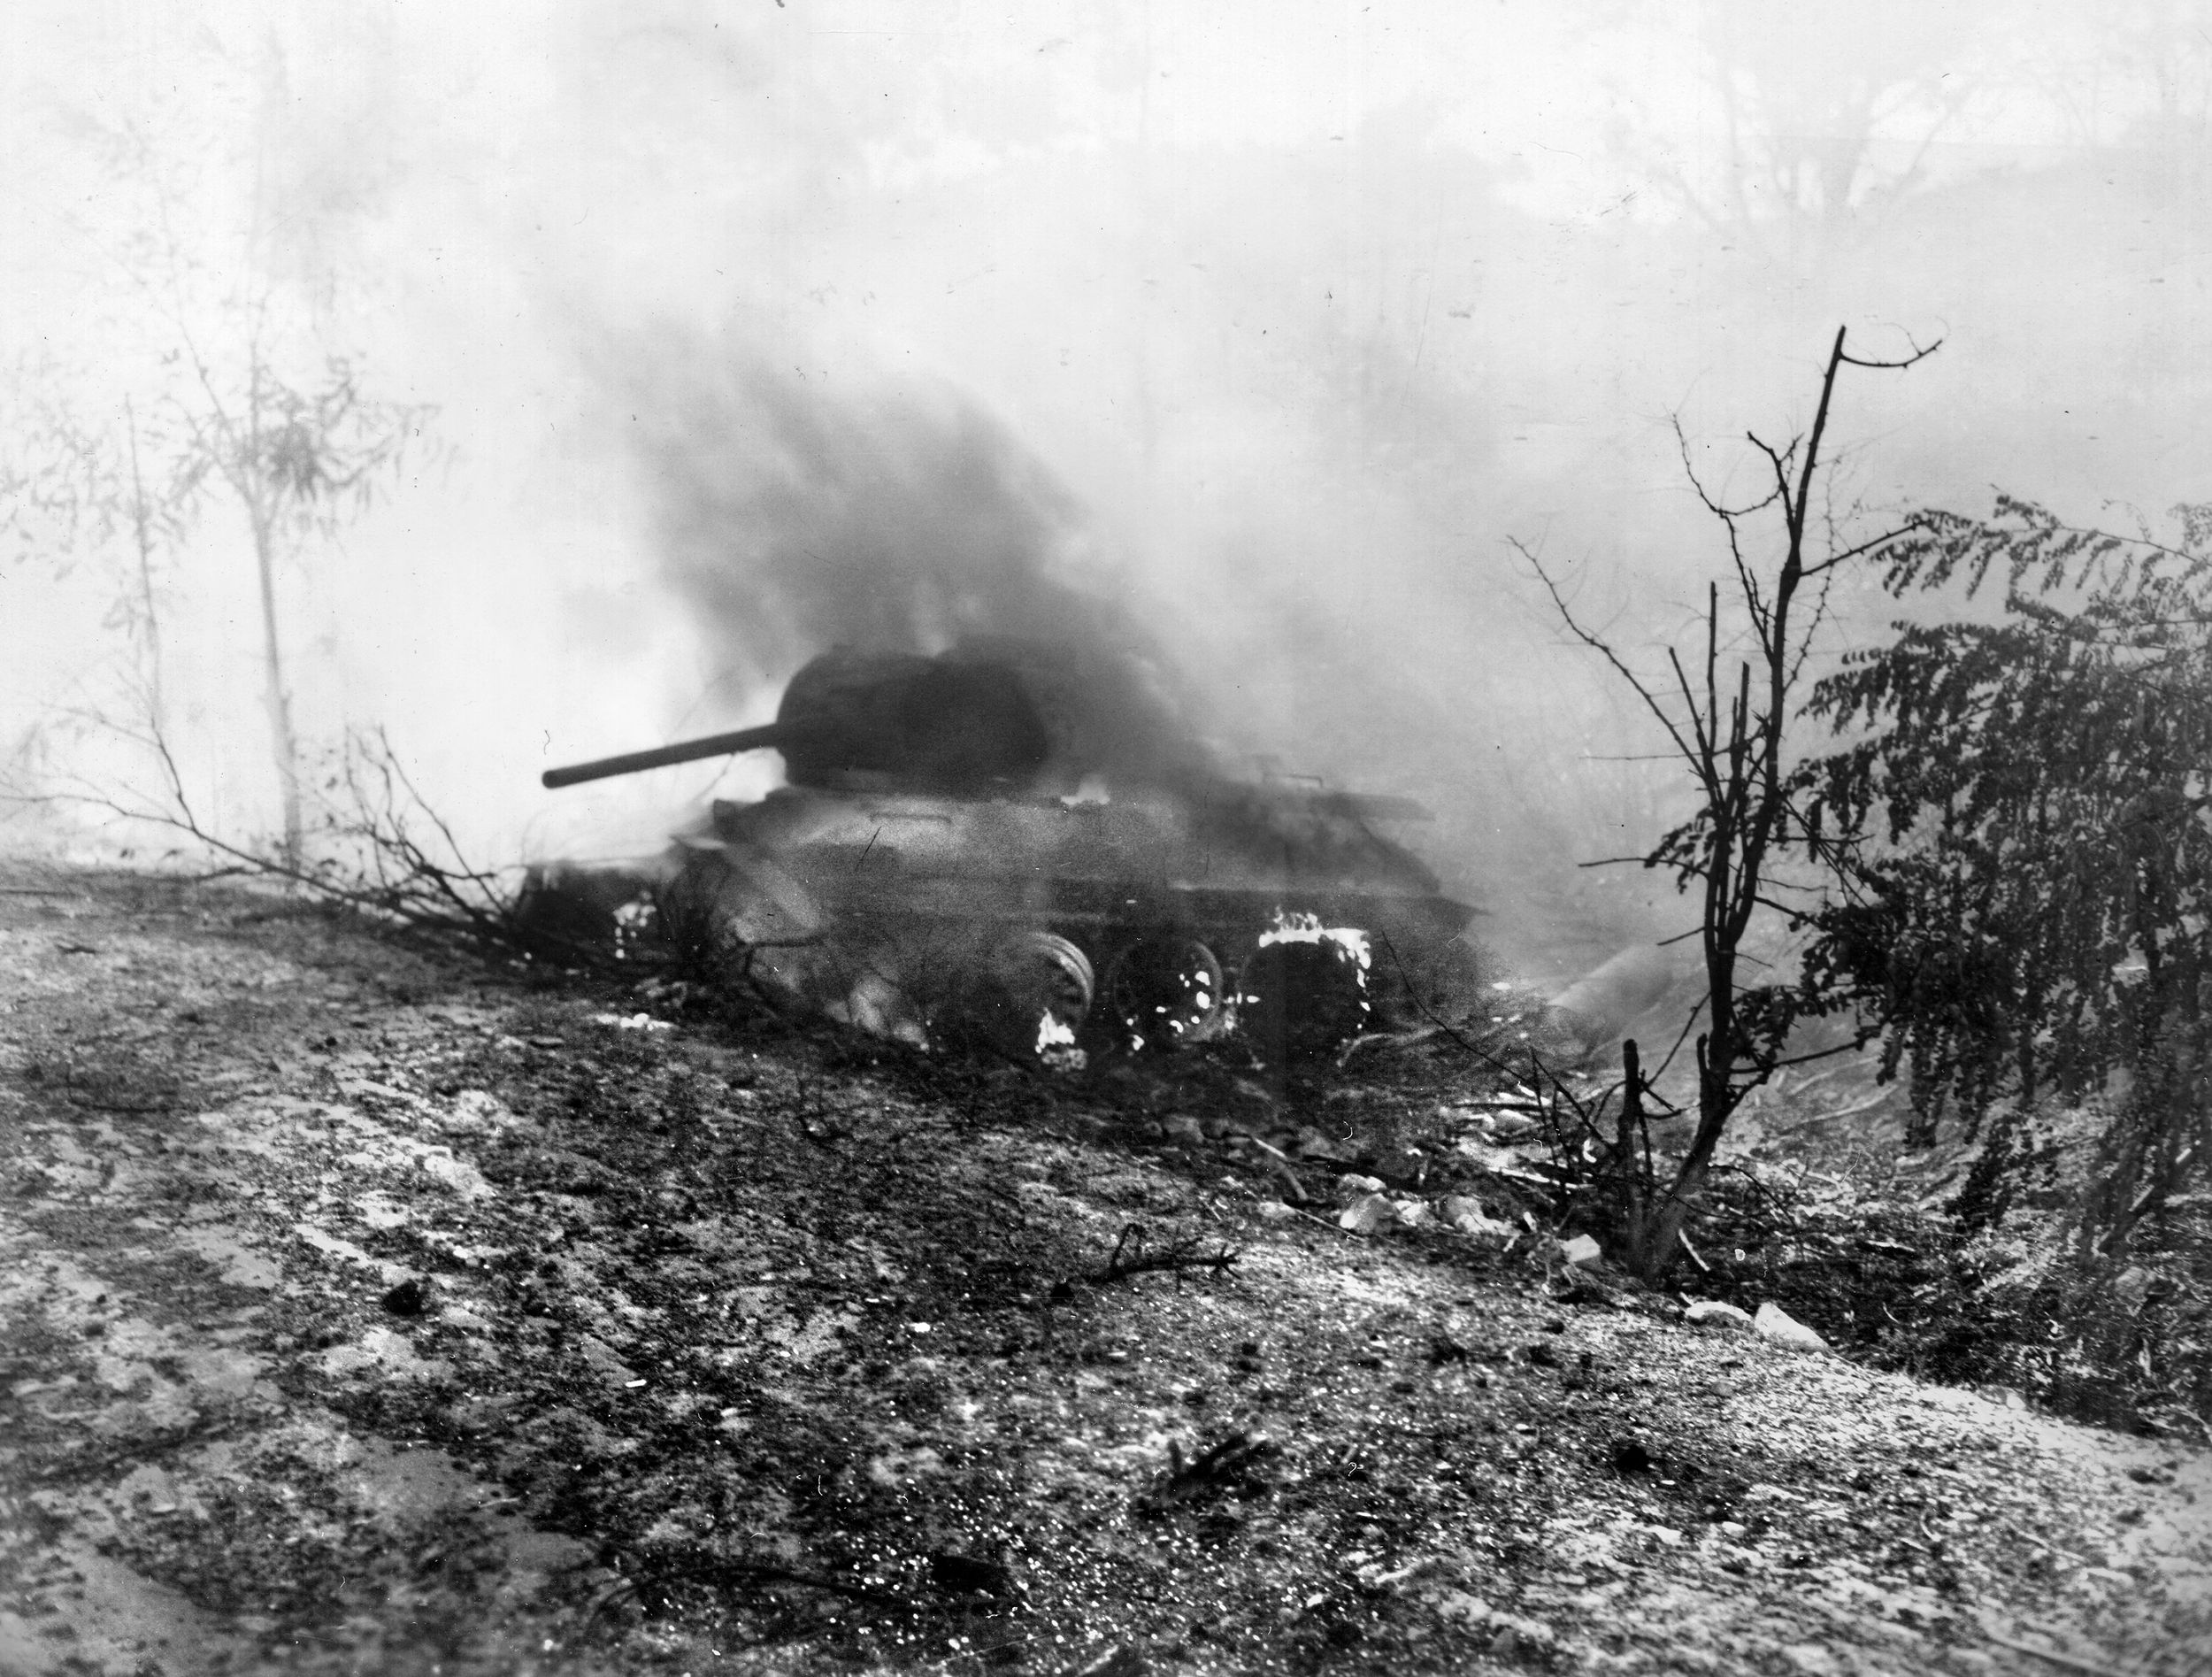 A North Korean tank, mostly likely one of the hundreds of T-34/85s supplied by the Soviet Union, burns by the side of the road, knocked out by the 89th Tank Battalion in the fall of 1950. Though U.N. forces led by the U.S. Eighth Army all but defeated the North Korean People’s Army, the arrival of hundreds of thousands of Chinese troops in October turned the tide of the conflict in the brutal winter of 1950-51.  